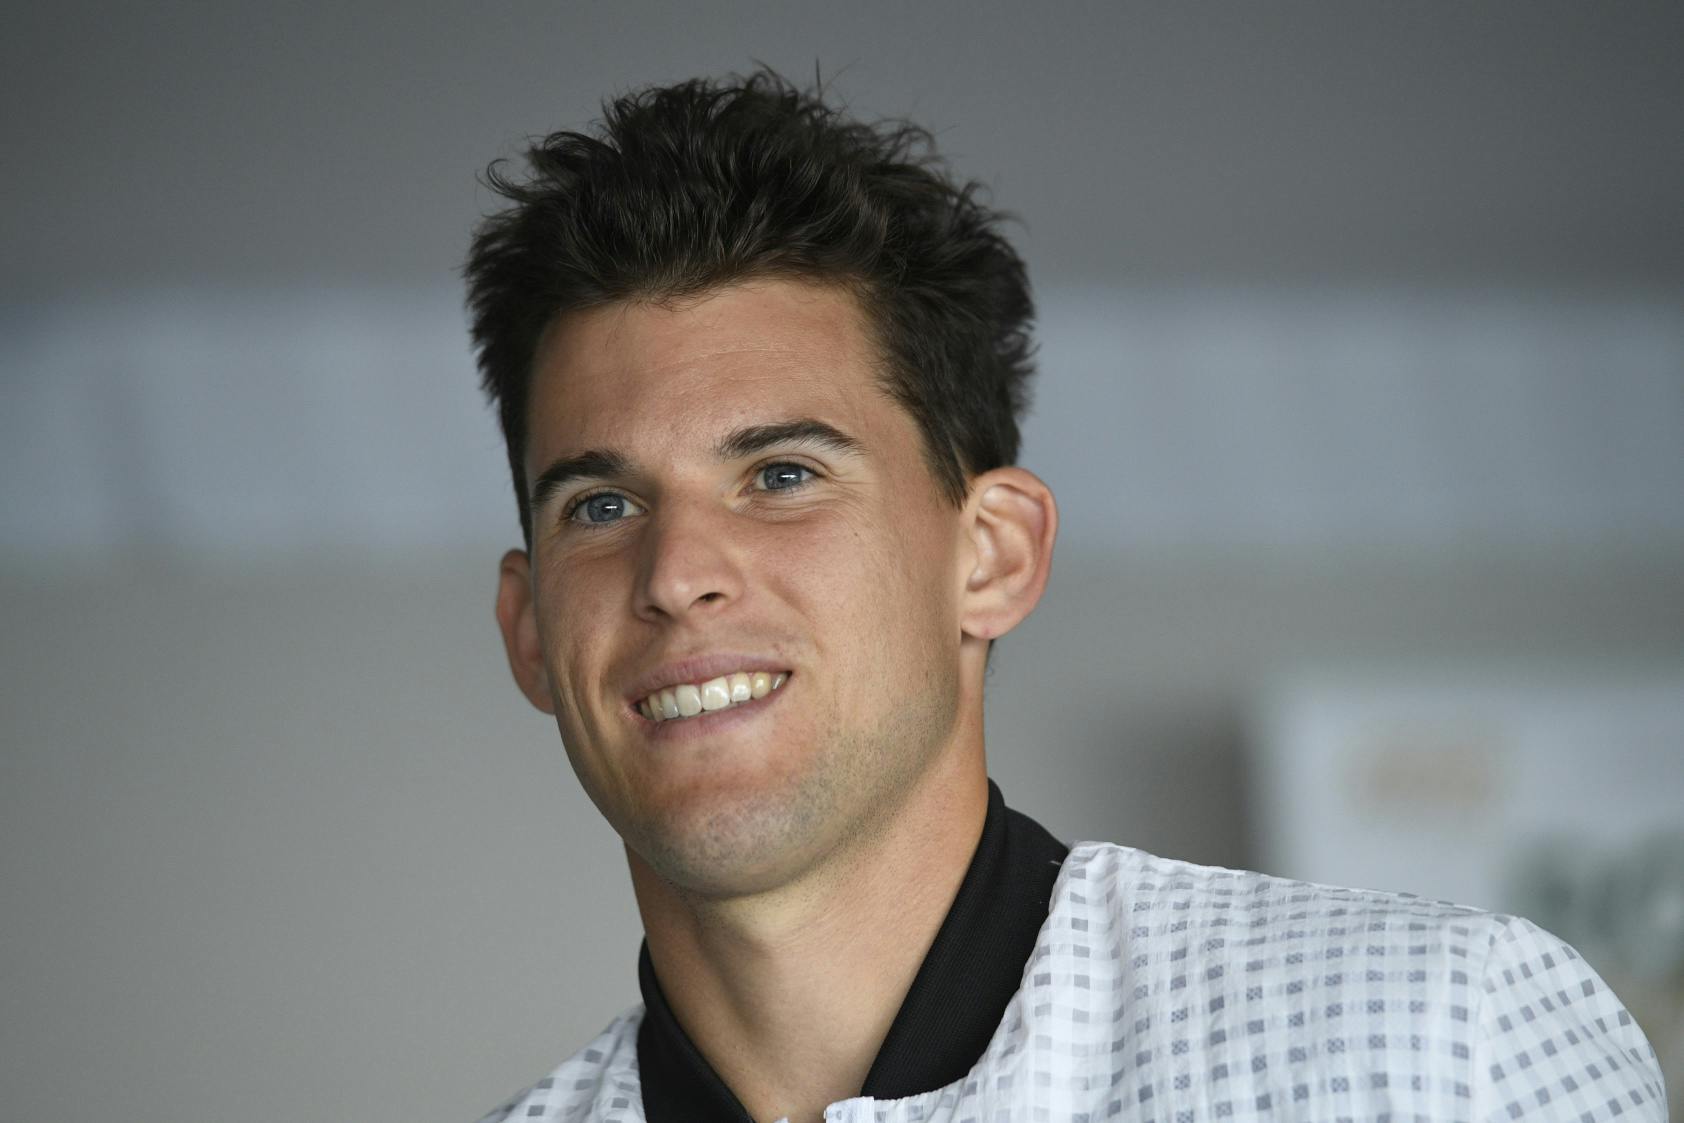 Dominic Thiem smiling during the media day at the 2019 Rolex Monte-Carlo Masters.